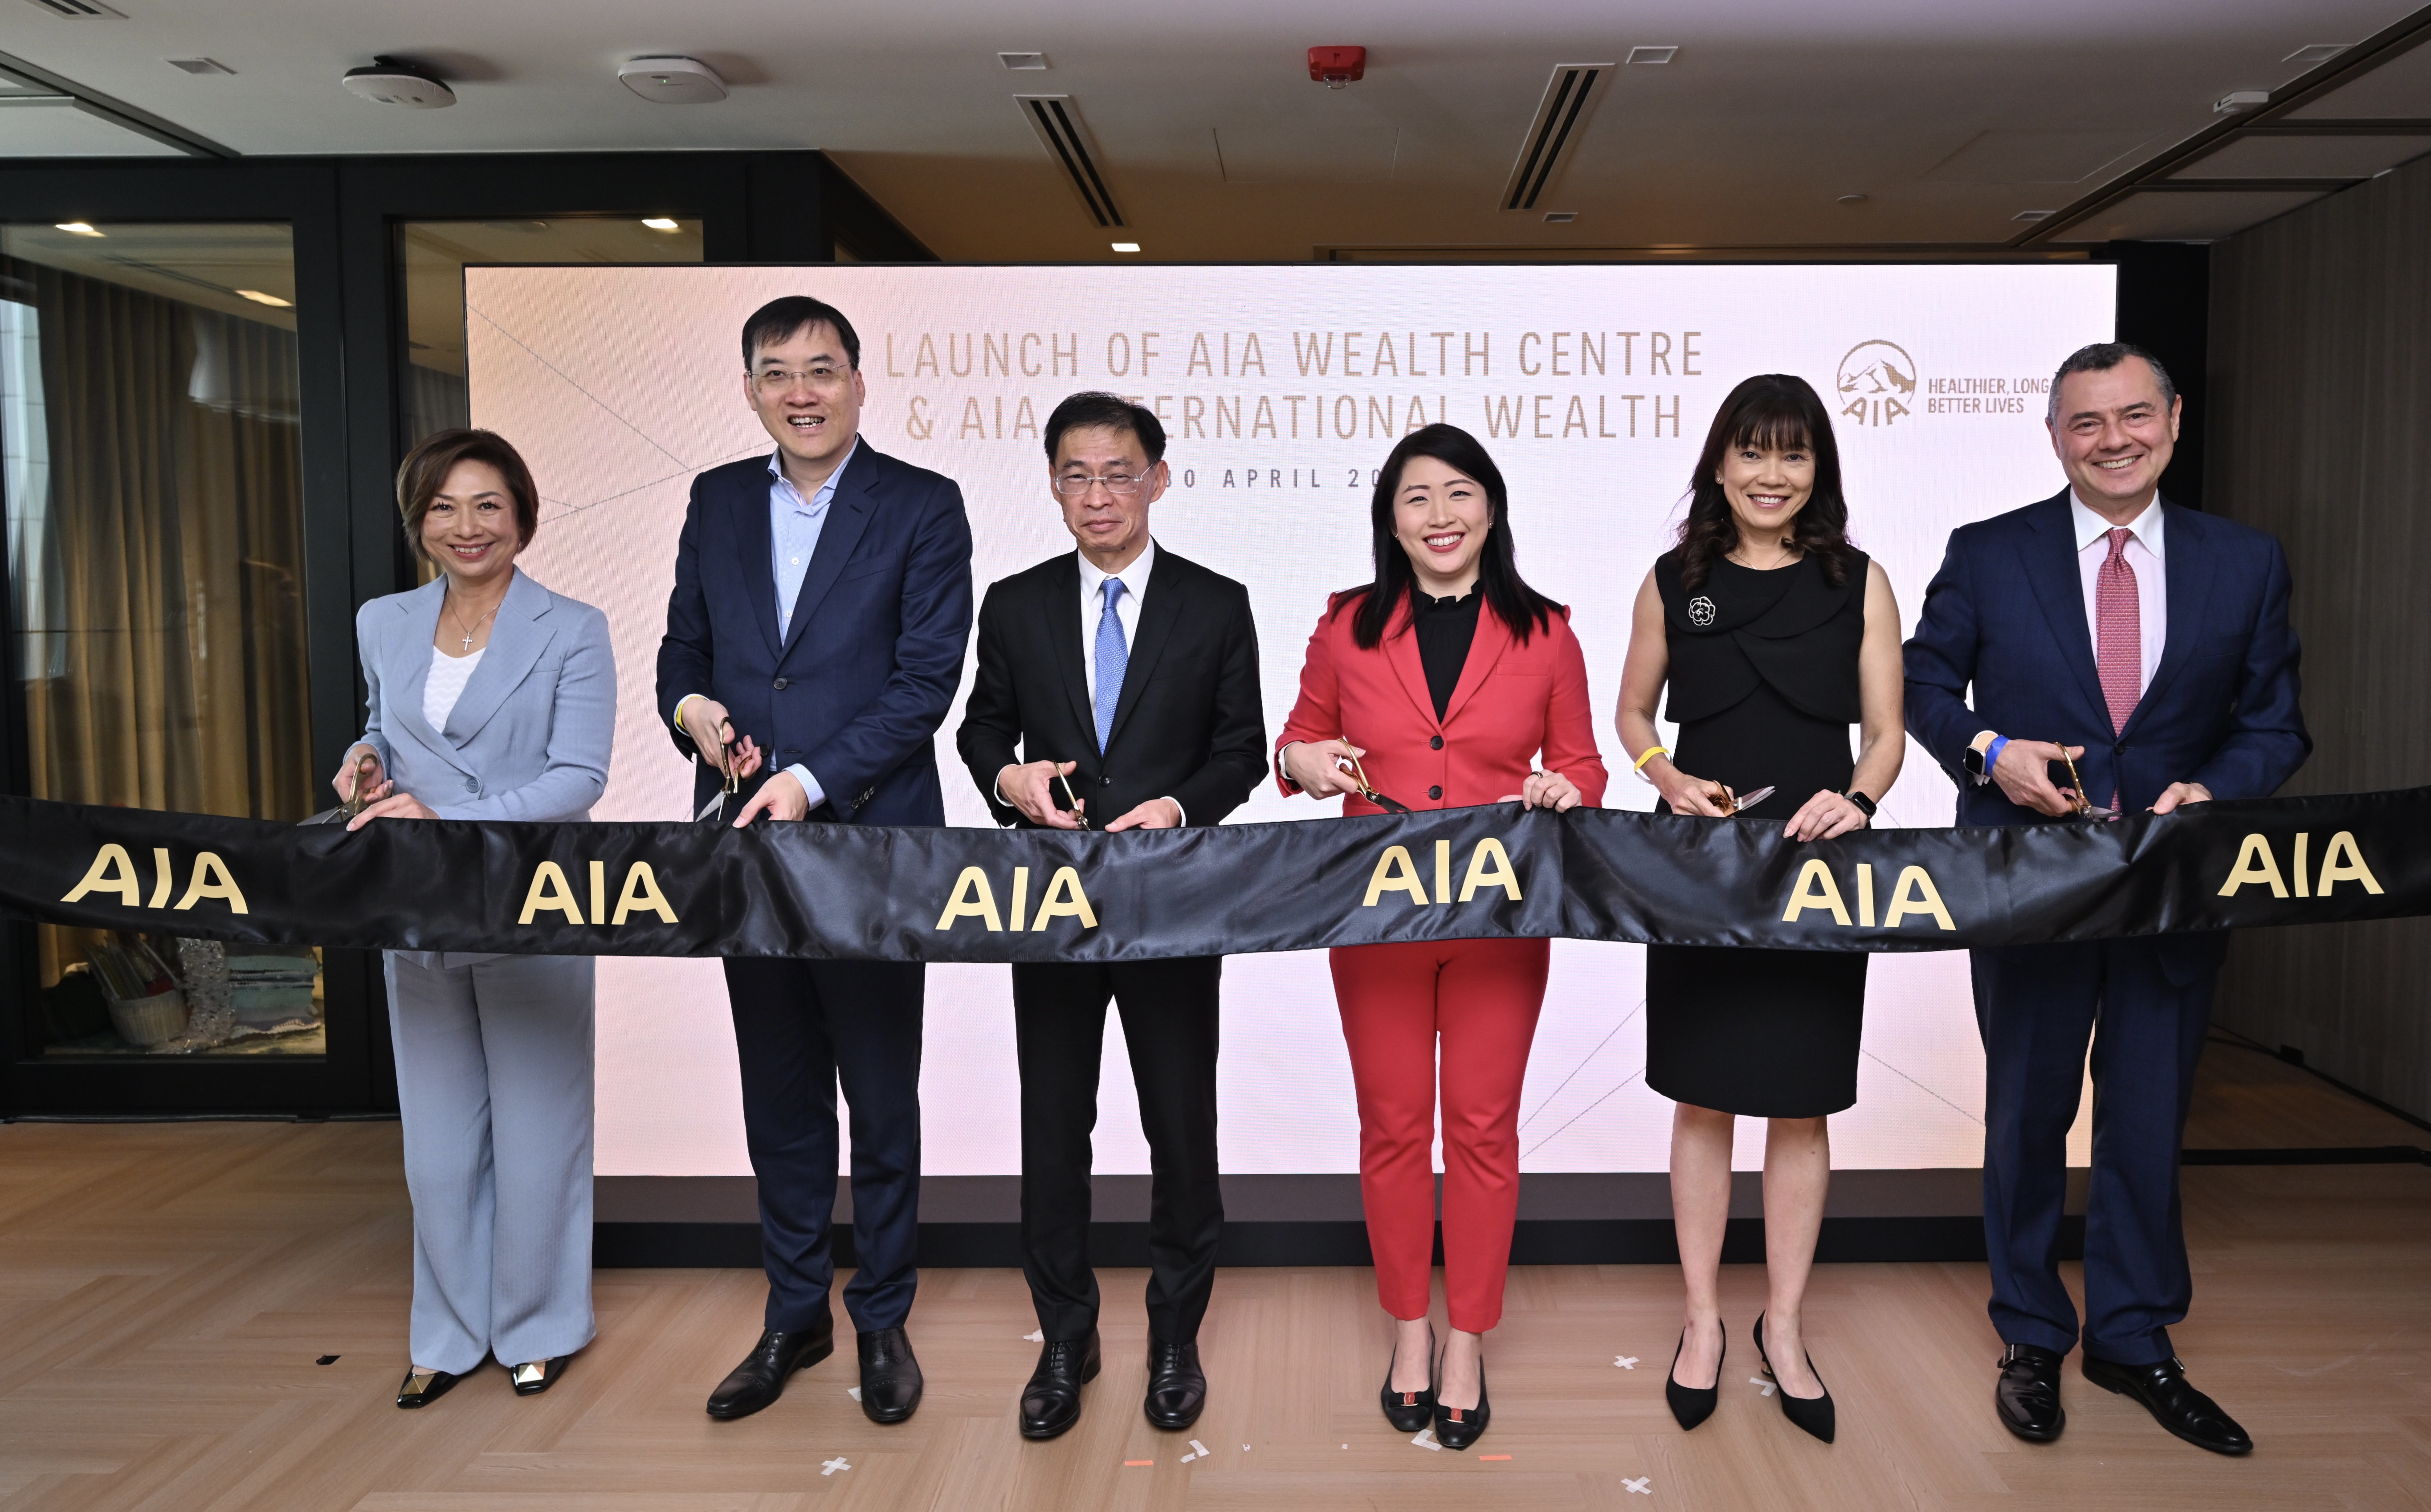 From left to right: Ms. Peggy Quek, CEO, AIA International Wealth, AIA Singapore; Mr. Jacky Chan, Regional Chief Executive and Group Chief Distribution Officer, AIA Group; Mr. Tan Hak Leh, Regional Chief Executive, AIA Group and Chairman of AIA Singapore; Guest-of-Honour Ms. Gillian Tan, Assistant Managing Director (Development and International) and Chief Sustainability Officer of the Monetary Authority of Singapore; Ms. Wong Sze Keed, CEO, AIA Singapore; and Mr. Stuart A. Spencer, Group Chief Marketing Officer, AIA Group, officially launches the AIA Wealth Centre and AIA International Wealth